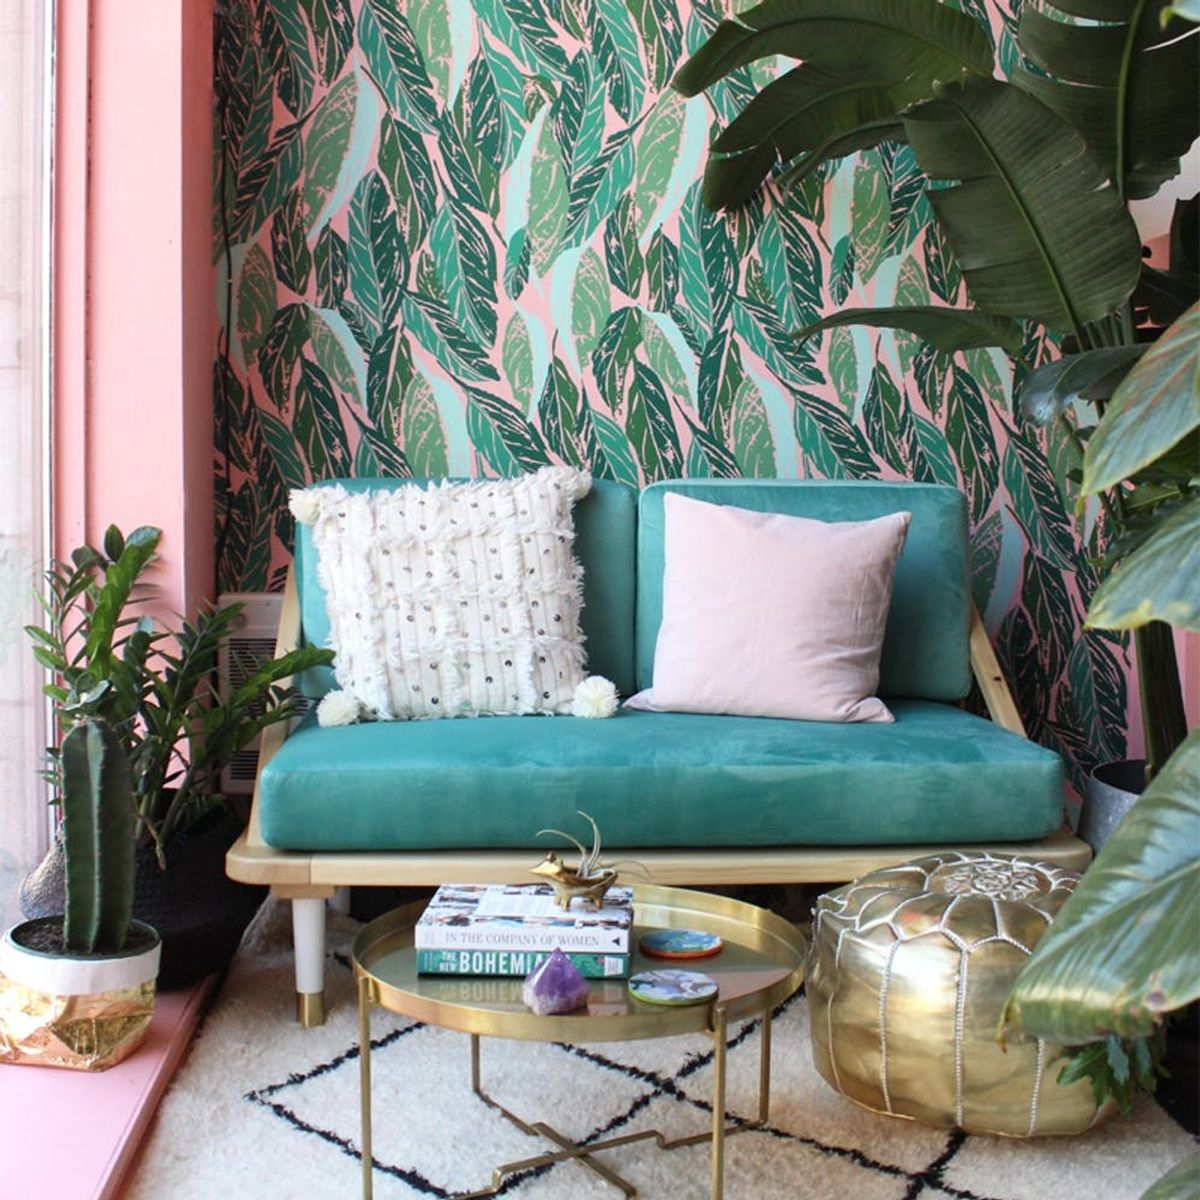 13 Ways to Use Pantone’s TECH-nique Palette in Your Home